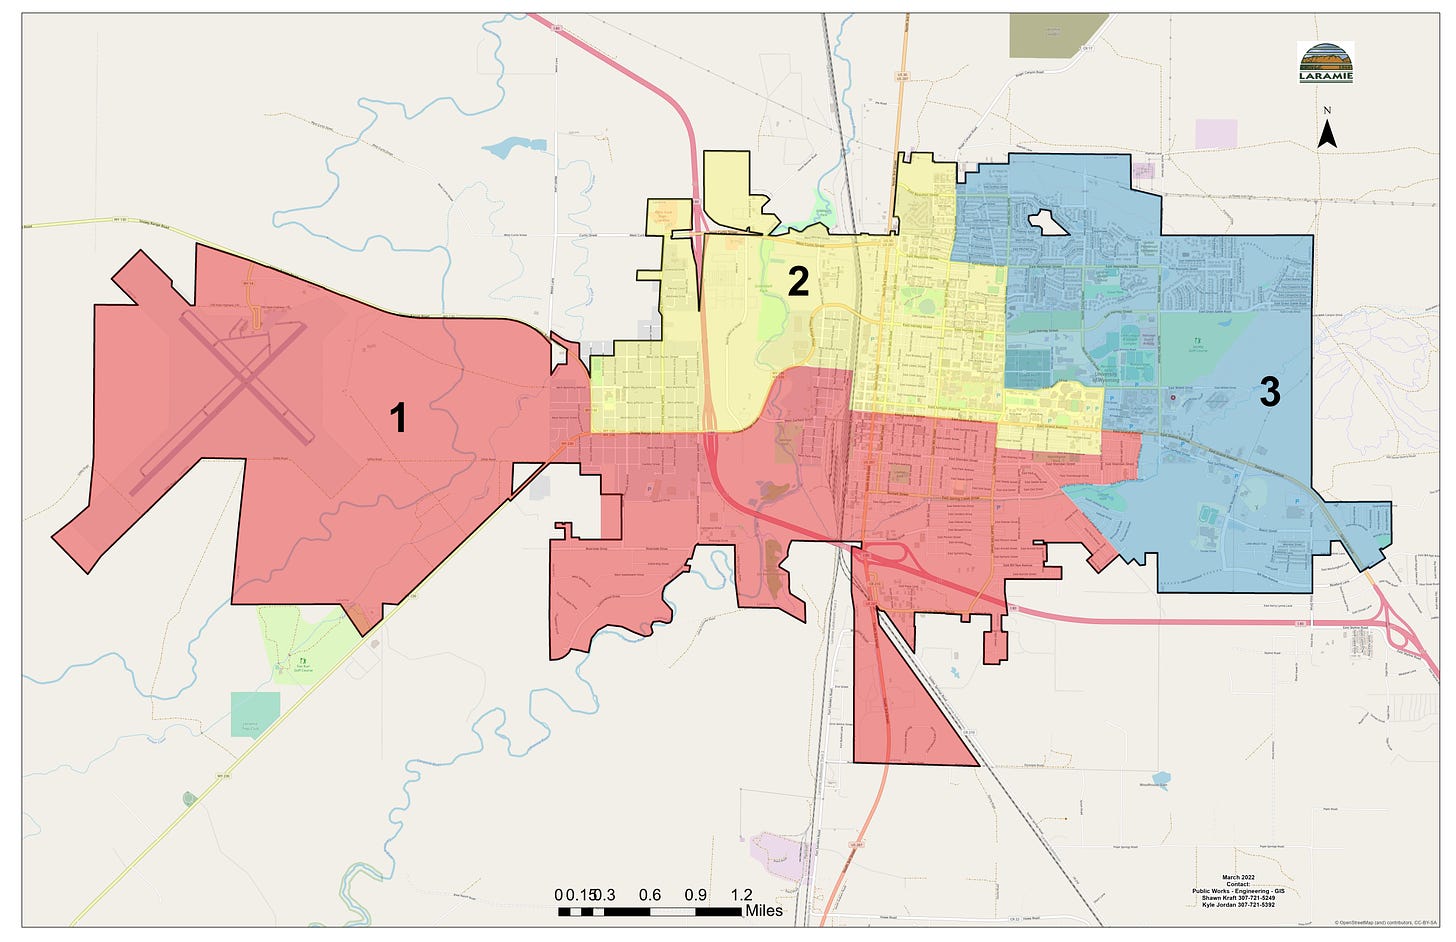 A map of Laramie shades Ward 1 as red, Ward 2 as yellow and Ward 3 as blue. Ward 1 includes the airport and the southwest and south-central portions of Laramie proper. Ward 2 encompasses the northwest and north-central areas of the city, as well as the entire university. Ward 3 encompasses the east of the city.